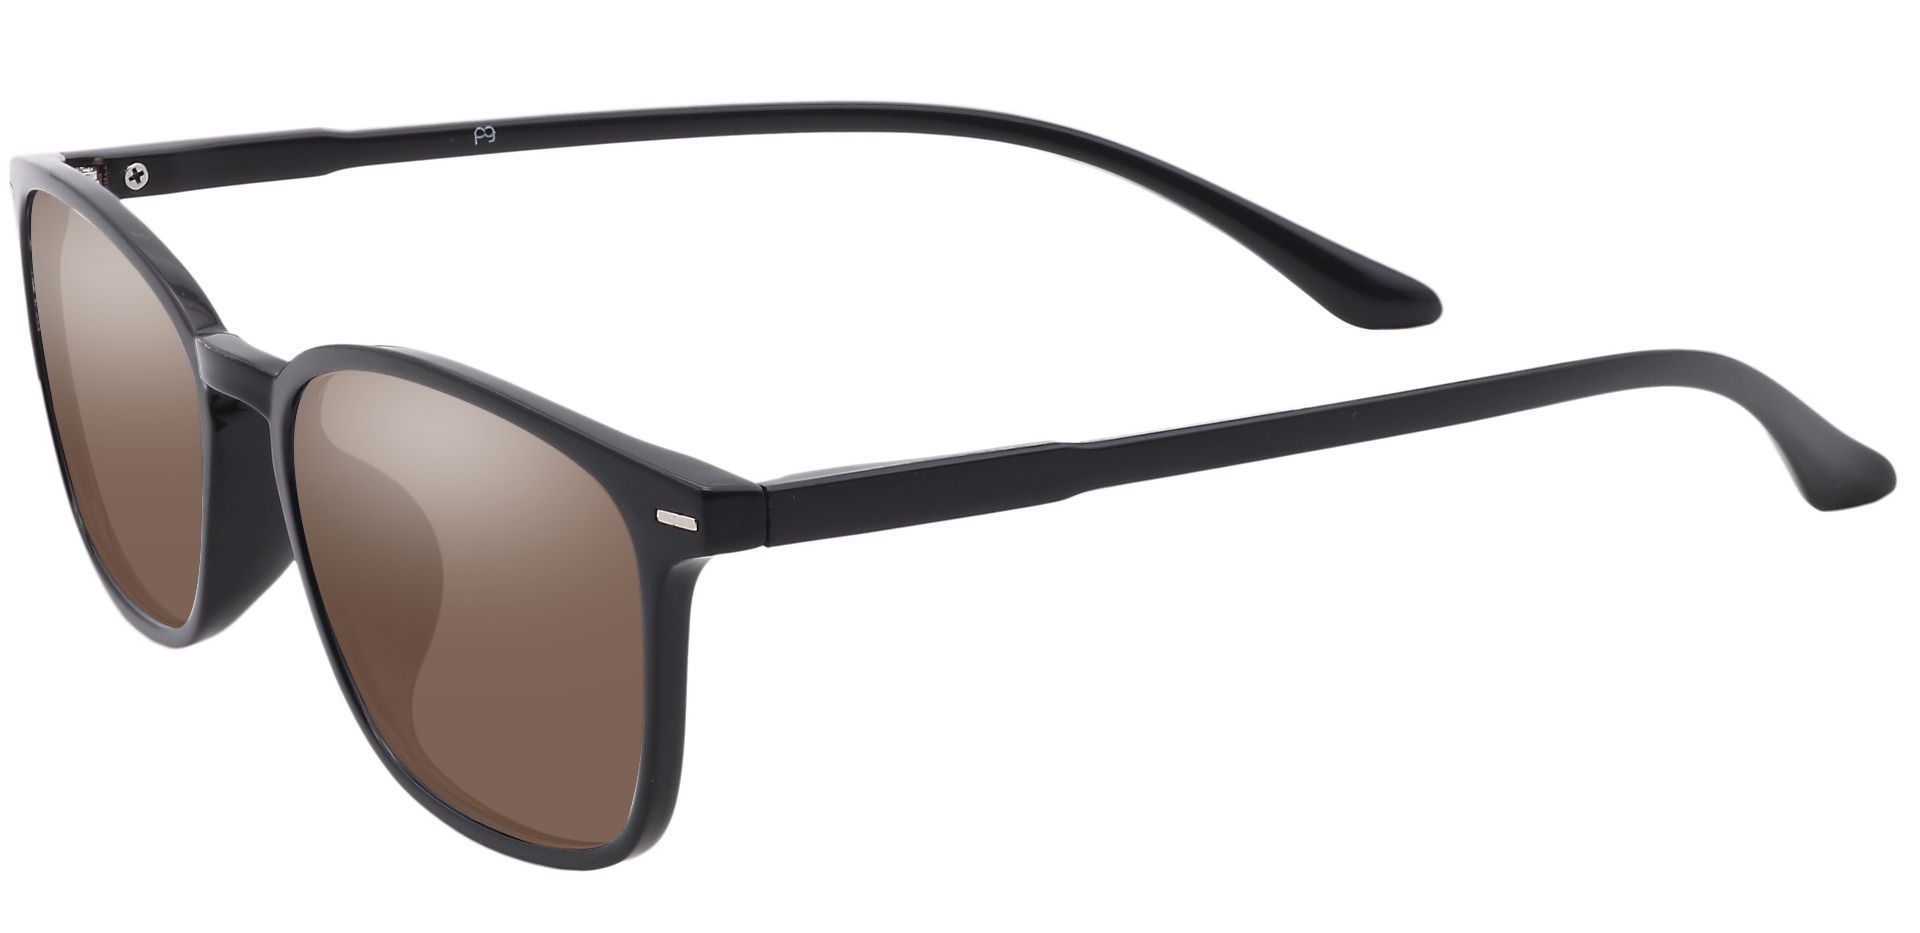 Cabo Oval Reading Sunglasses - Black Frame With Brown Lenses